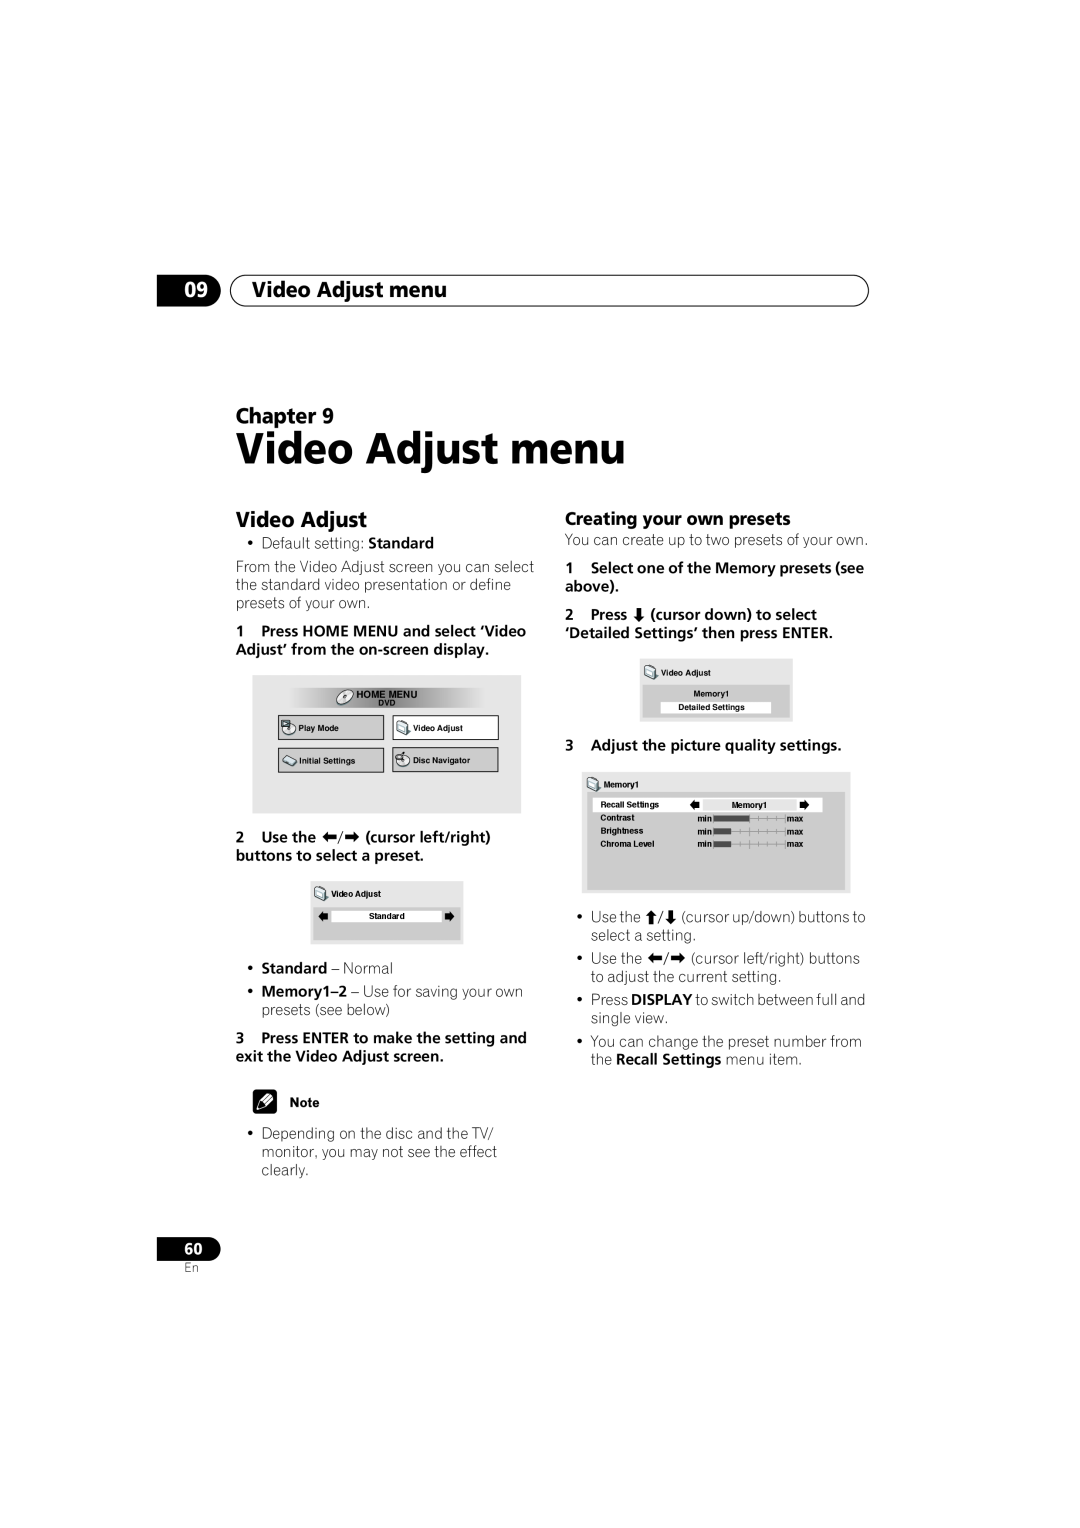 Pioneer XV-DV900, XV-DV700, S-DV900SW, S-DV700ST, S-DV700SW manual 09Video Adjust menu Chapter, Creating your own presets 